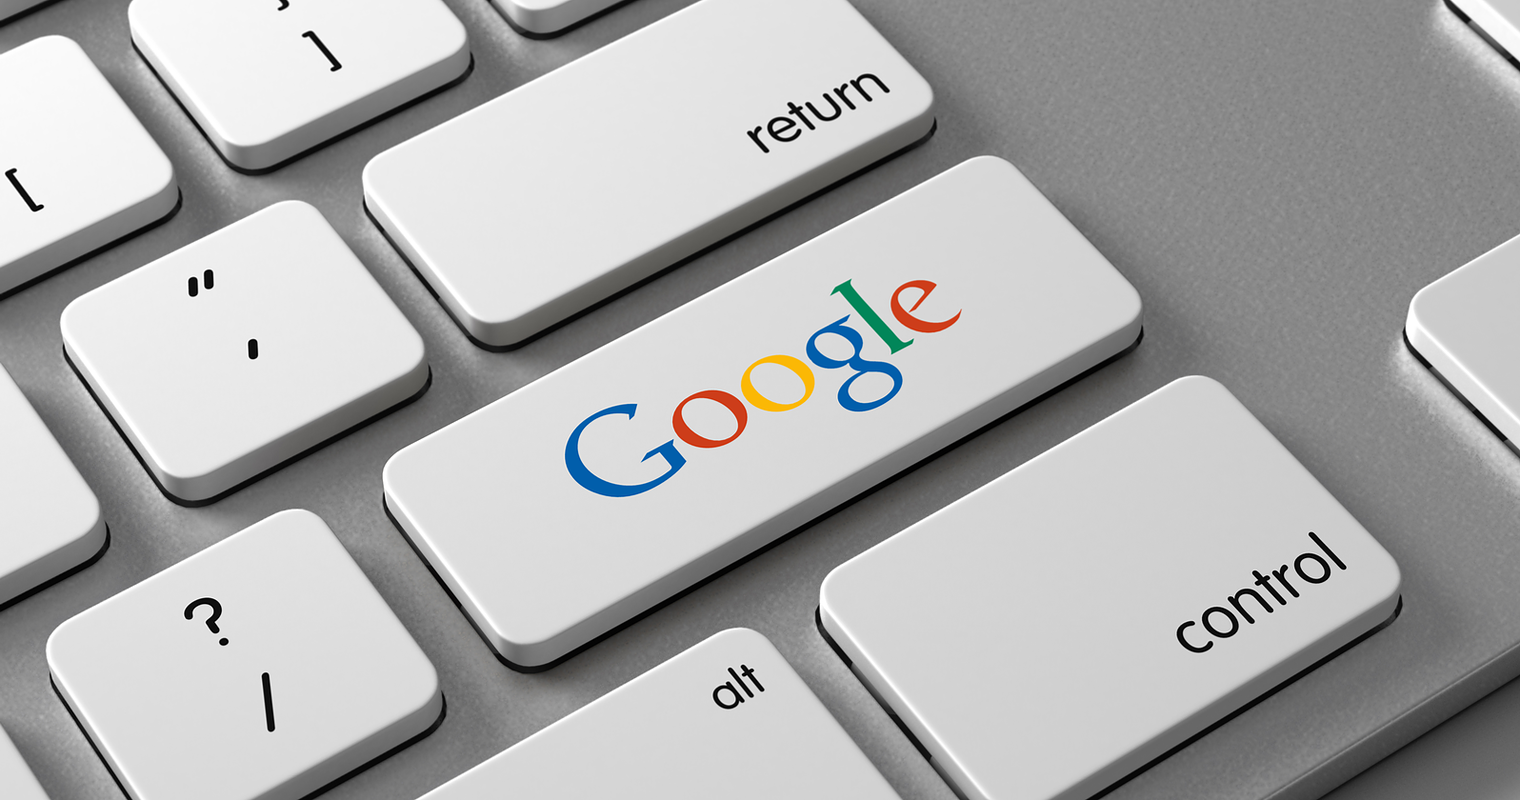 Google’s Q1 Earnings Are In – But What Was The Miss?